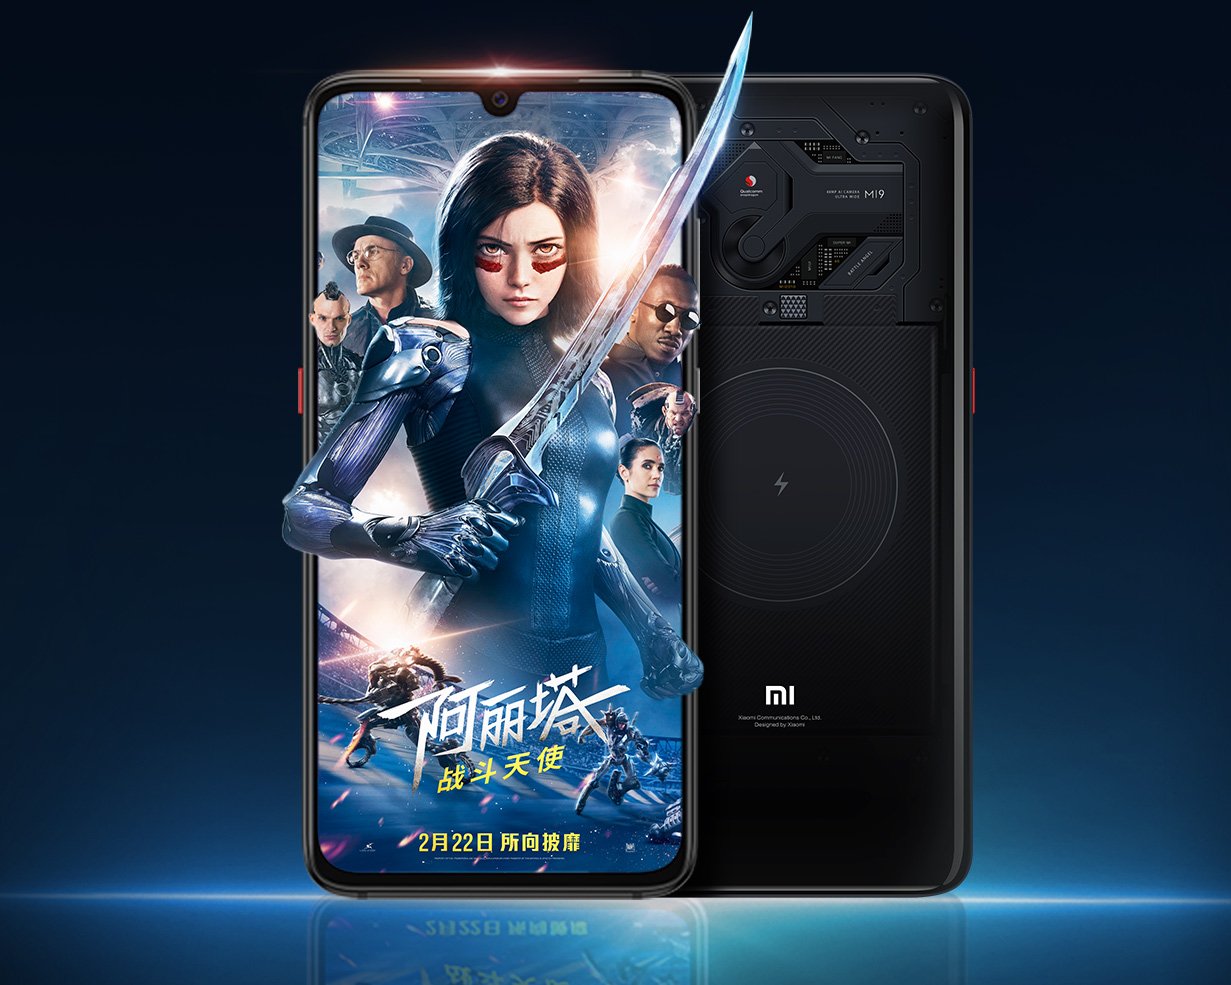 Xiaomi Mi 9 and Mi 9 Transparent Edition launched: Bring AMOLED displays,  Snapdragon 855, and 20W wireless charging - Gizmochina